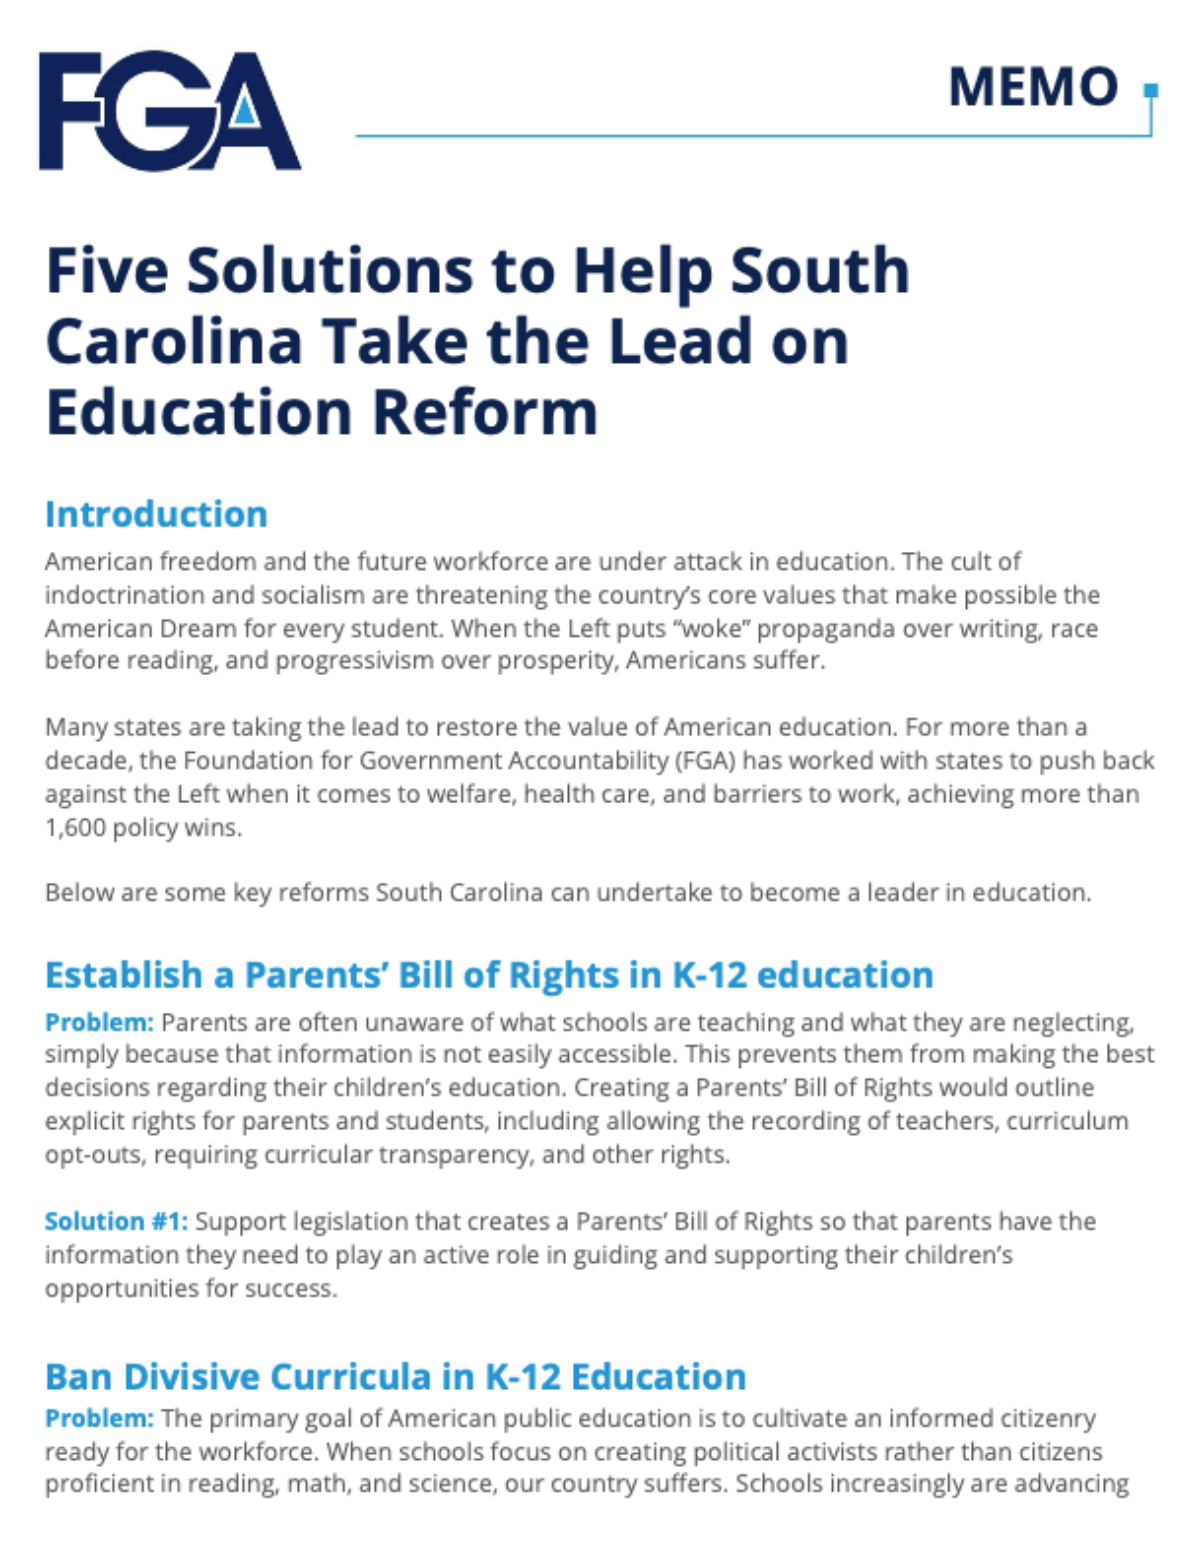 Five Solutions to Help South Carolina Take the Lead on Education Reform